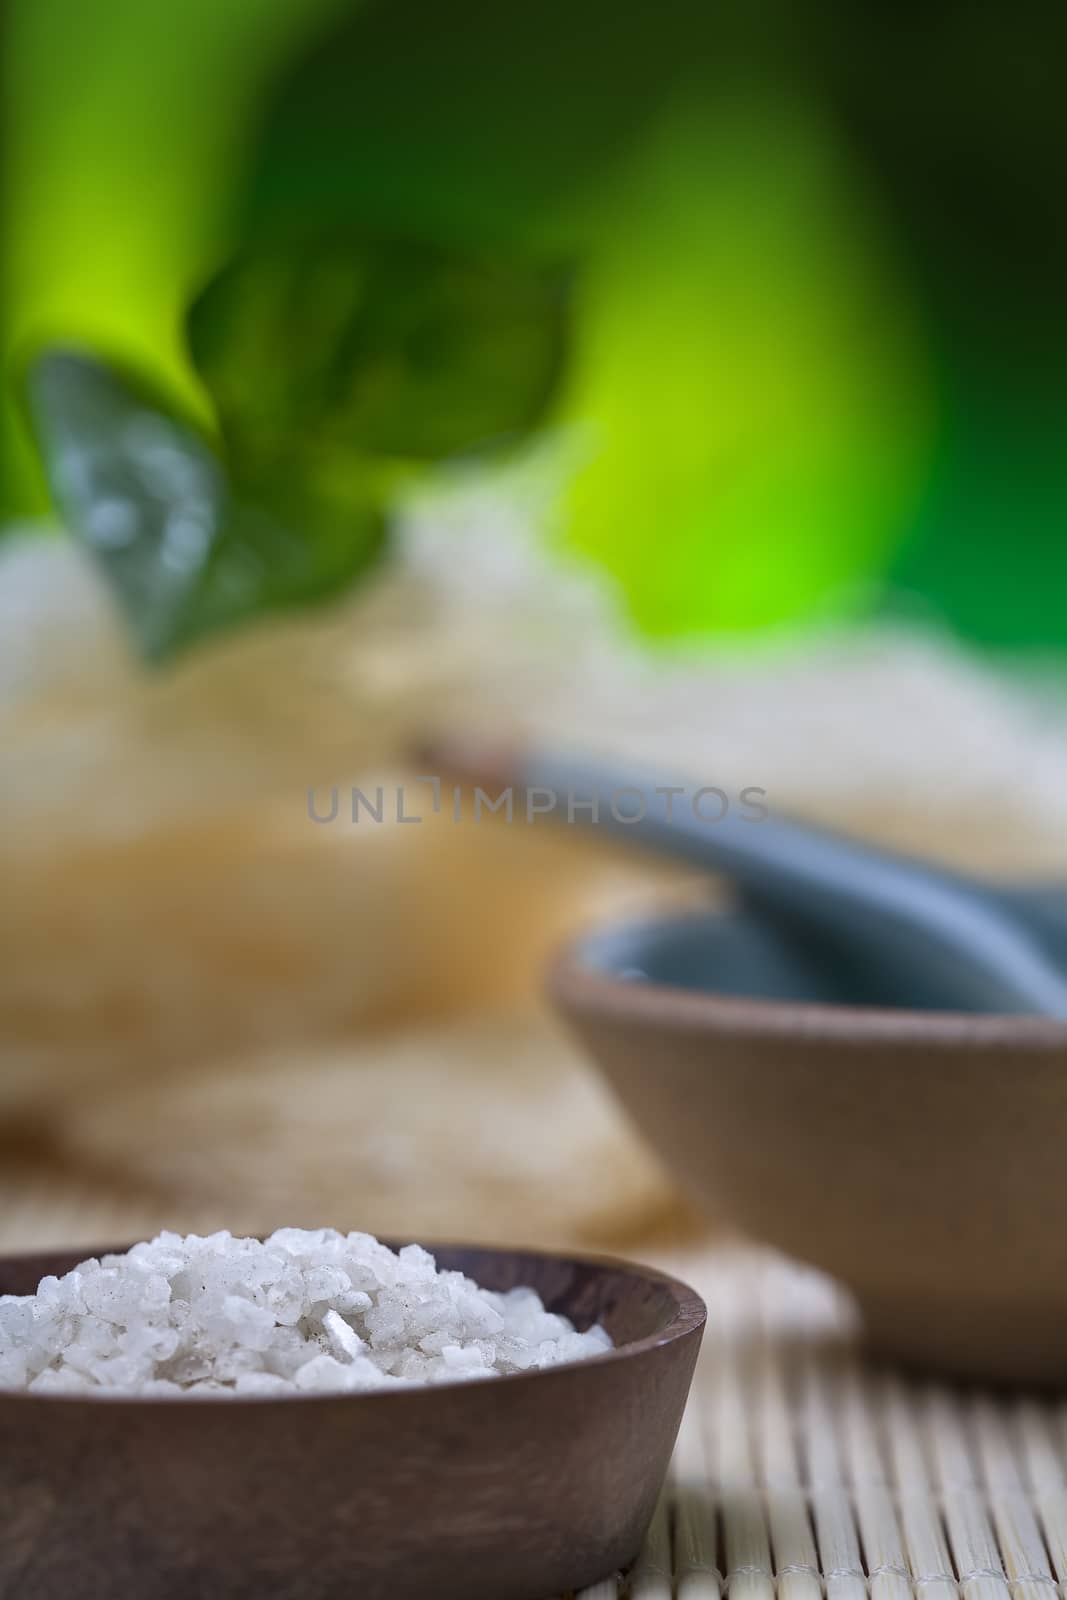 Close up view of spa theme objects on natural background